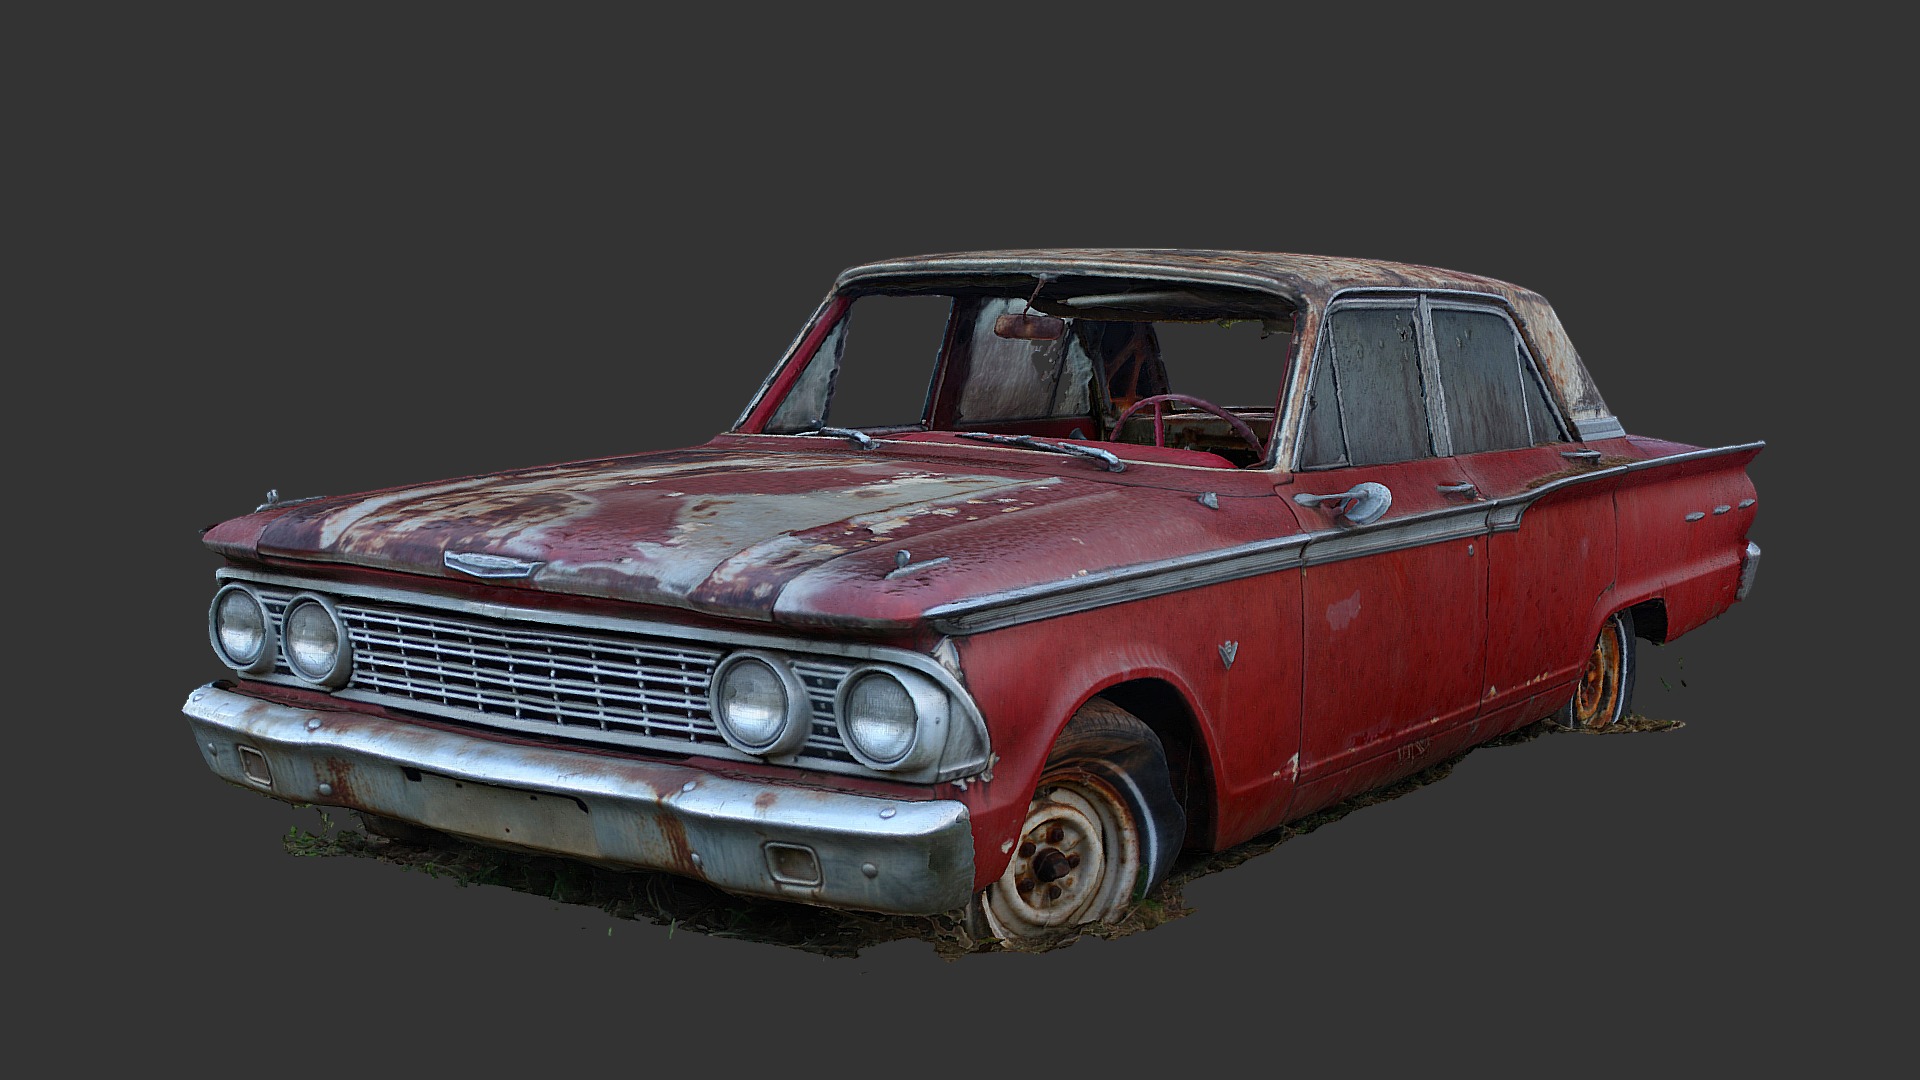 3D model Abandoned Sedan (Raw Scan) - This is a 3D model of the Abandoned Sedan (Raw Scan). The 3D model is about a red car with a person in the driver seat.